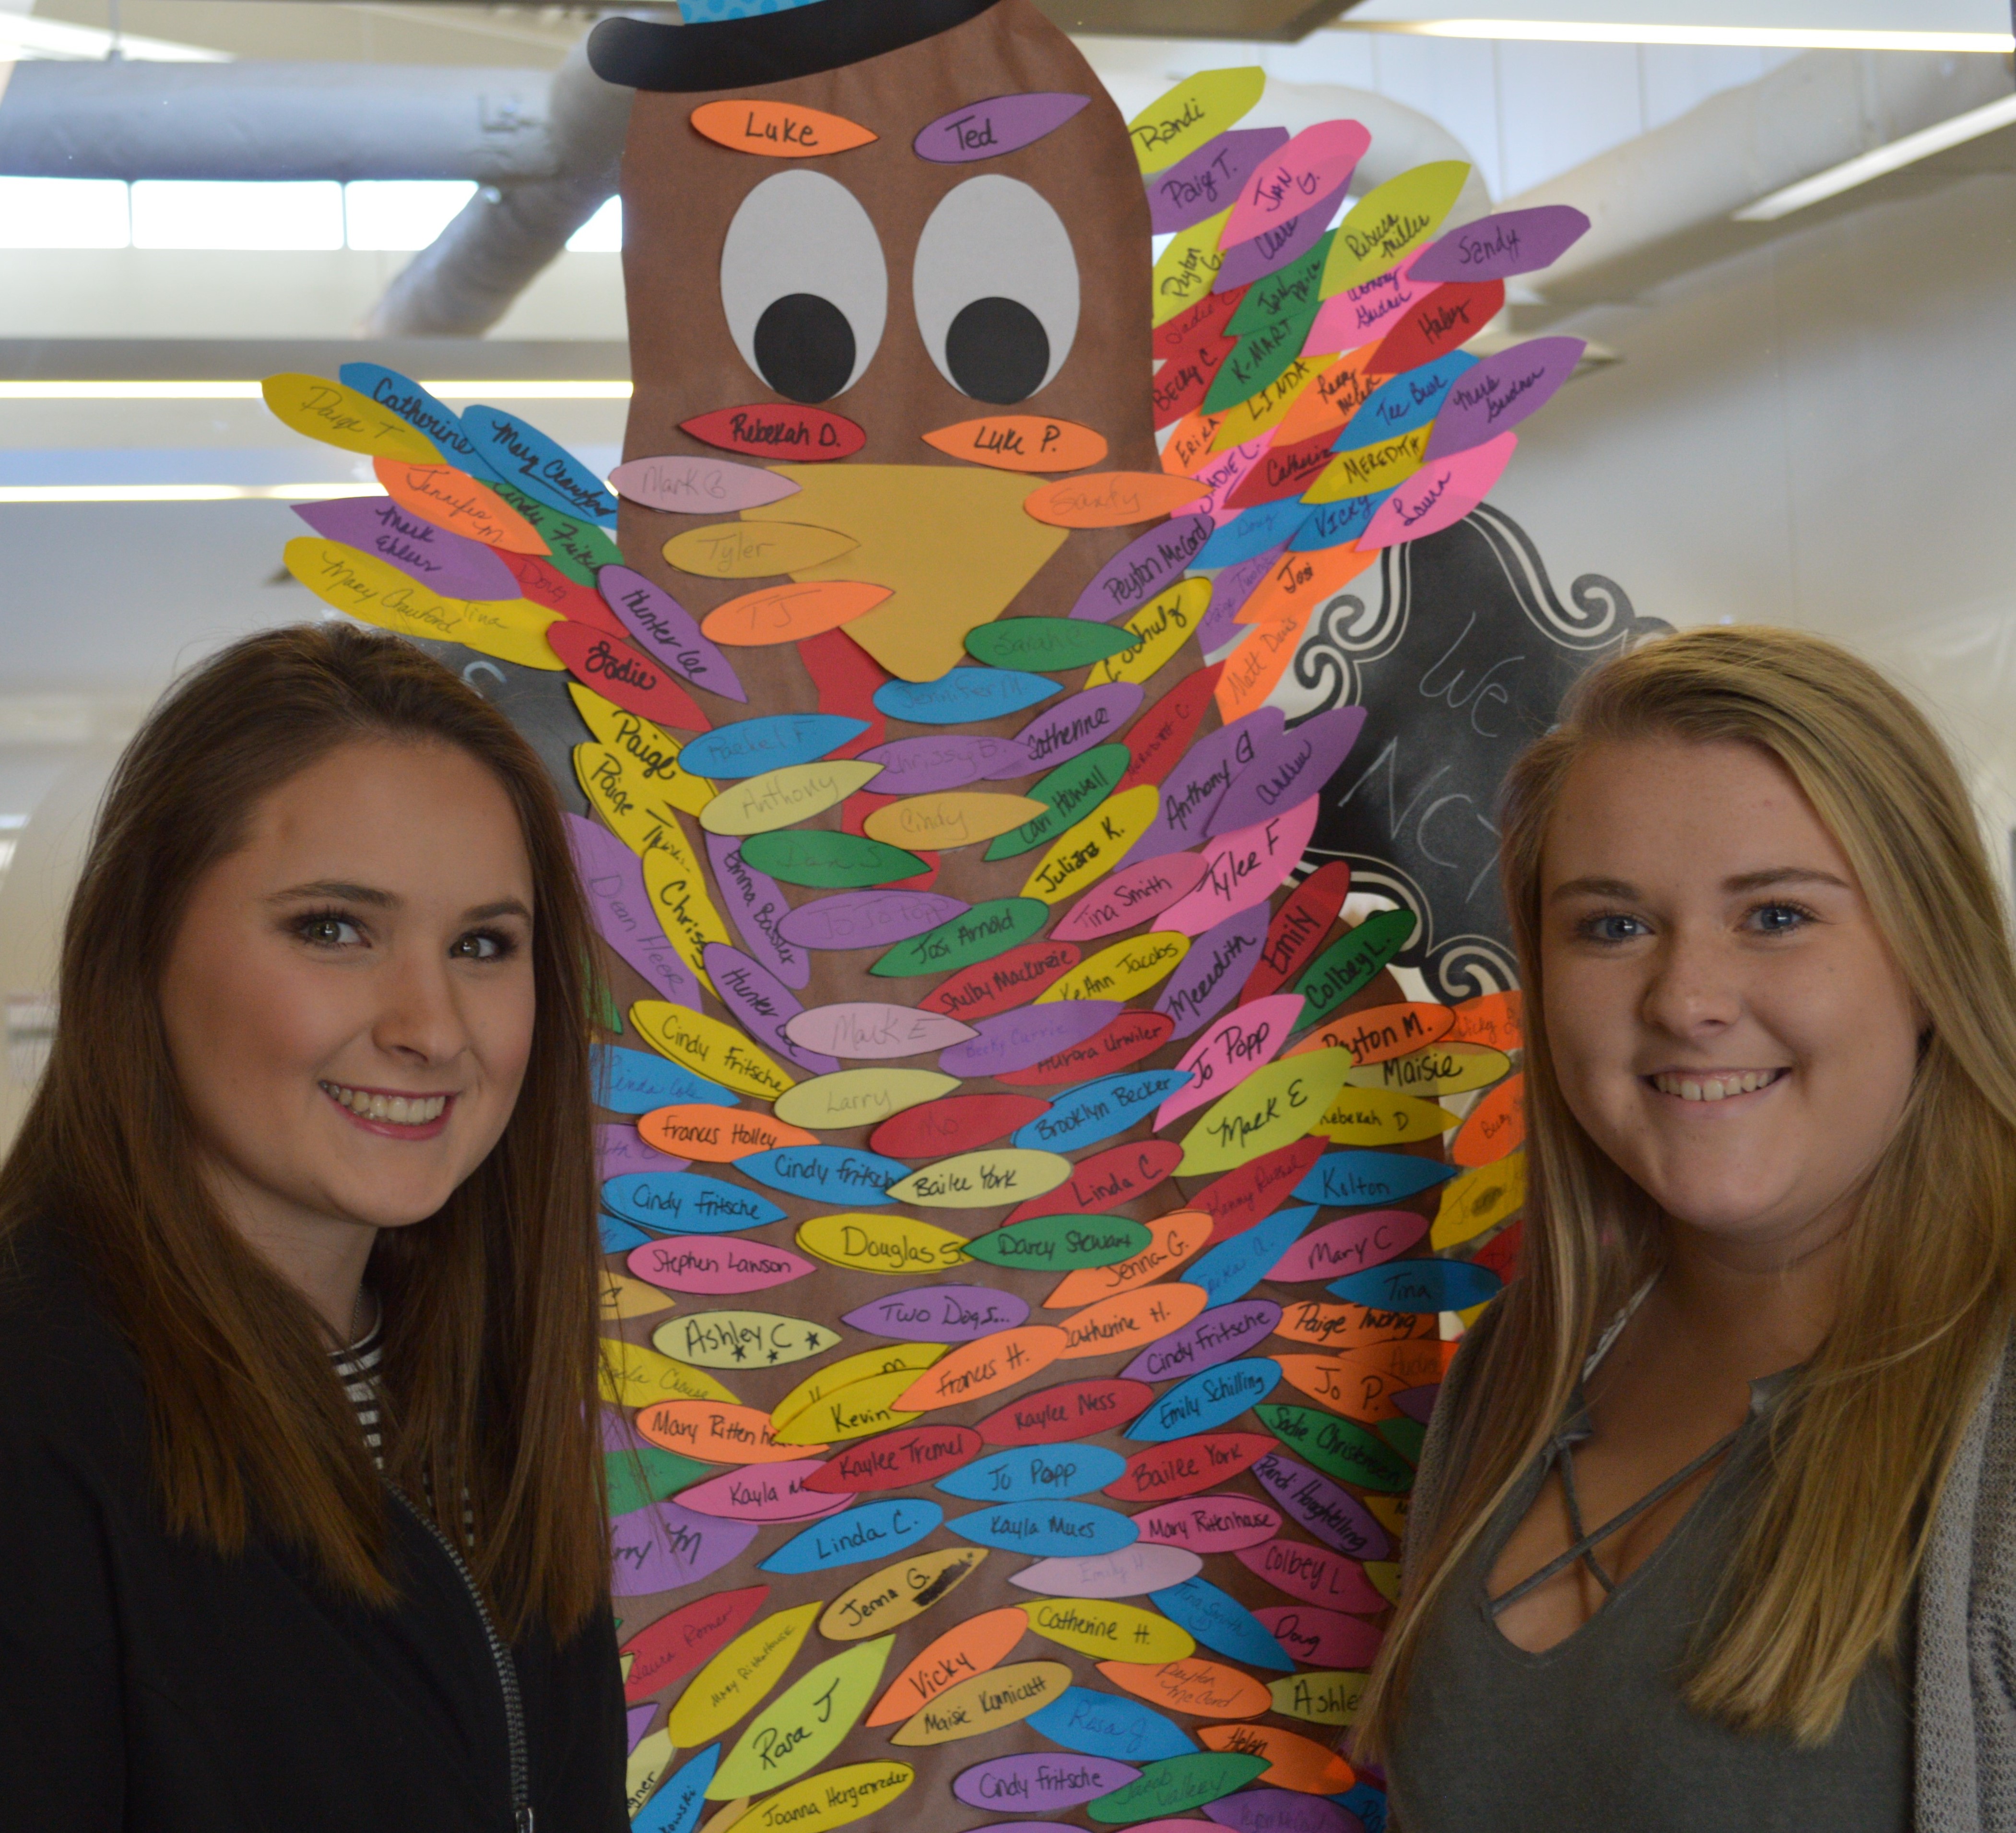 Students at the NCTA campus "Countdown to Kindness" project. (Griffiths/NCTA photo) 